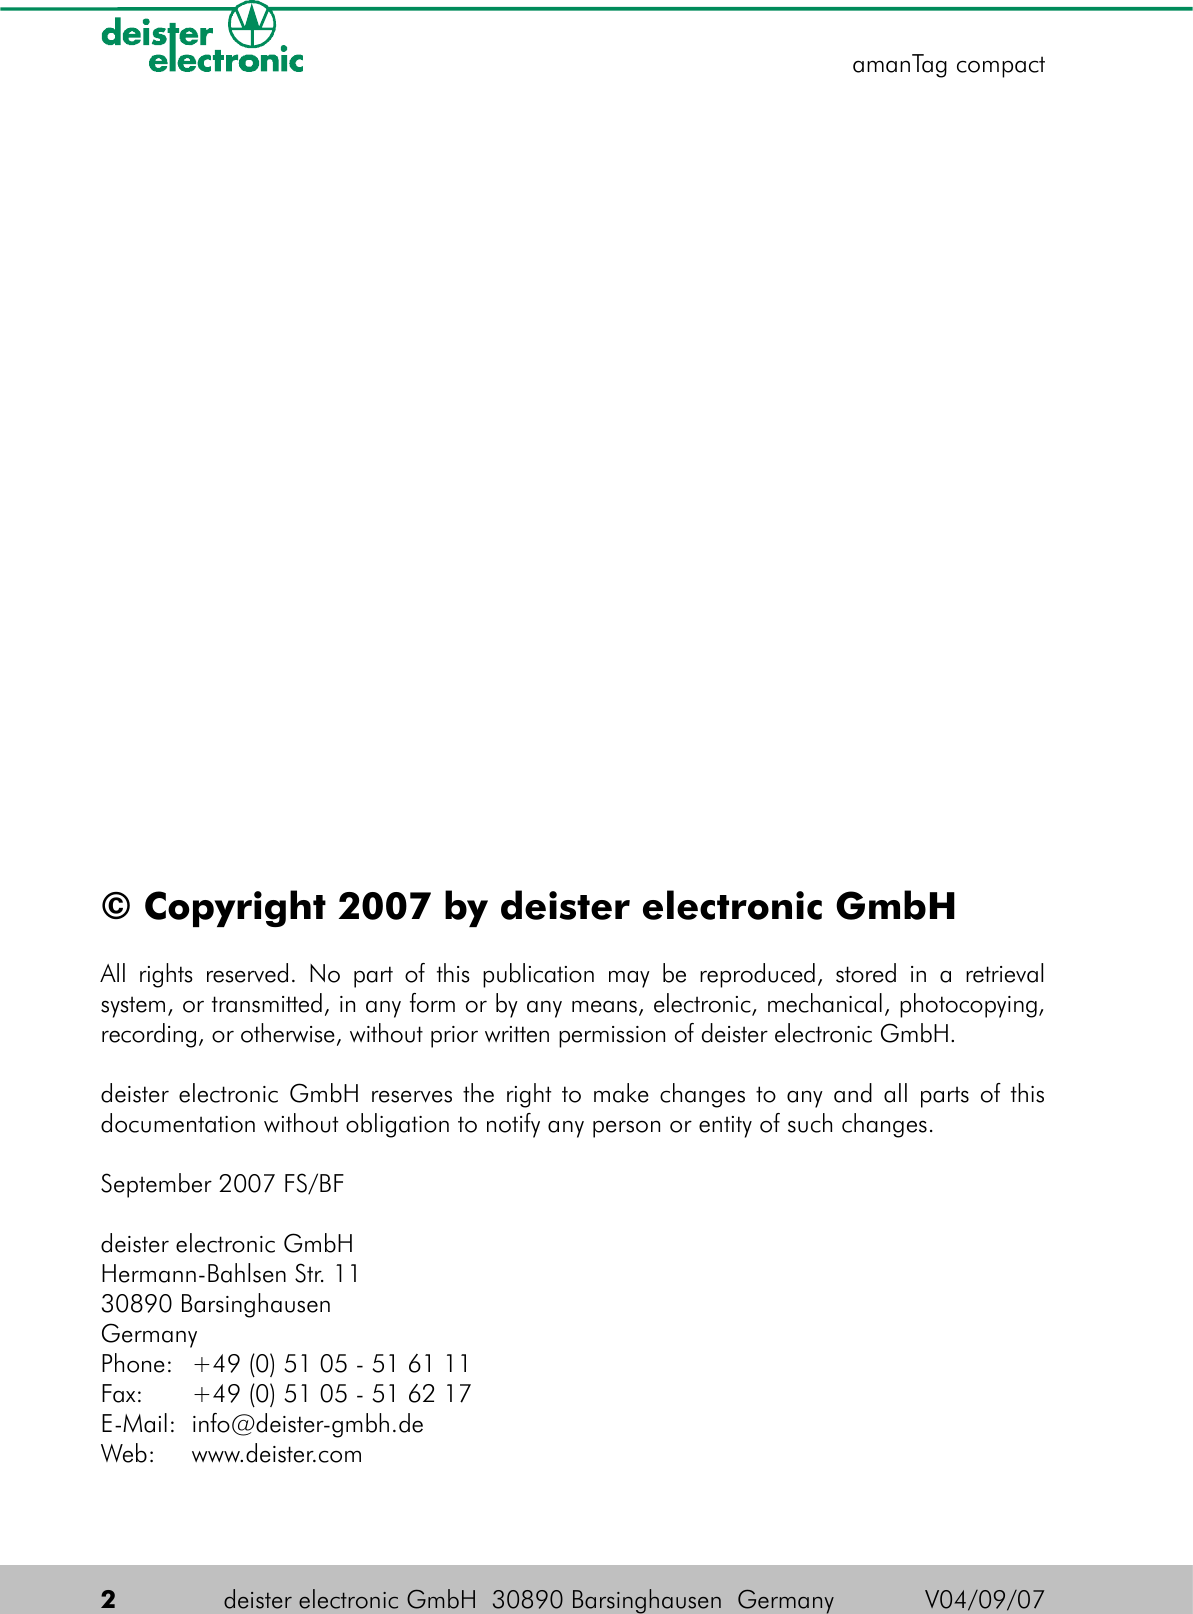 © Copyright 2007 by deister electronic GmbHAll rights reserved. No part of this publication may be reproduced, stored in a retrieval system, or transmitted, in any form or by any means, electronic, mechanical, photocopying, recording, or otherwise, without prior written permission of deister electronic GmbH.deister electronic GmbH reserves the right to make changes to any and all parts of this documentation without obligation to notify any person or entity of such changes.September 2007 FS/BFdeister electronic GmbHHermann-Bahlsen Str. 11 30890 BarsinghausenGermanyPhone: +49 (0) 51 05 - 51 61 11Fax: +49 (0) 51 05 - 51 62 17E-Mail: info@deister-gmbh.deWeb: www.deister.com 2deister electronic GmbH  30890 Barsinghausen  Germany  V04/09/07amanTag compact